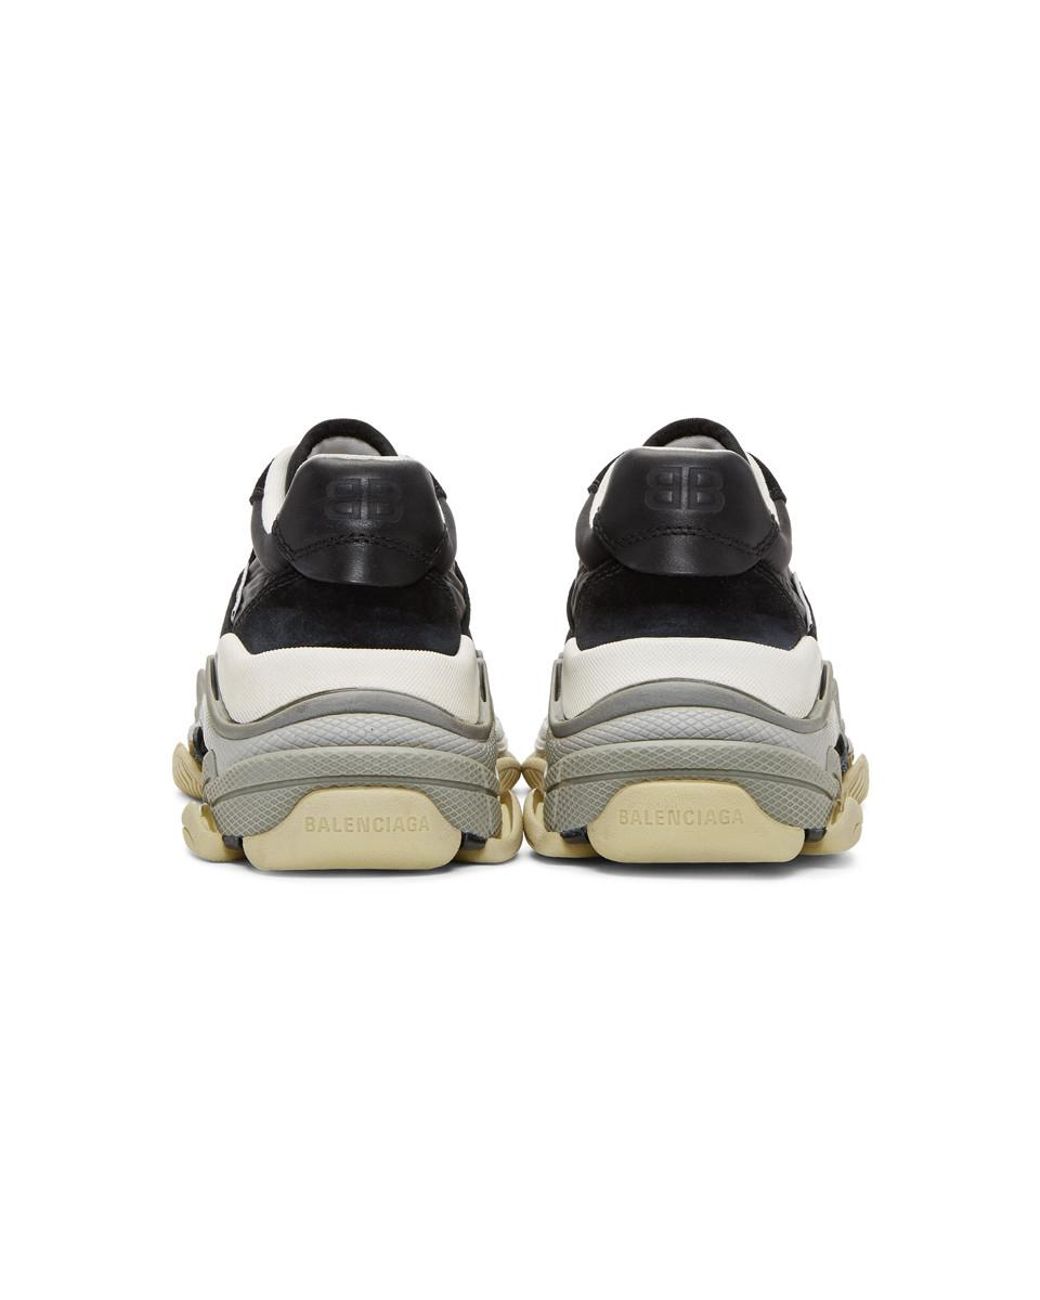 Balenciaga Suede Black And Burgundy Triple S Sneakers for Men | Lyst